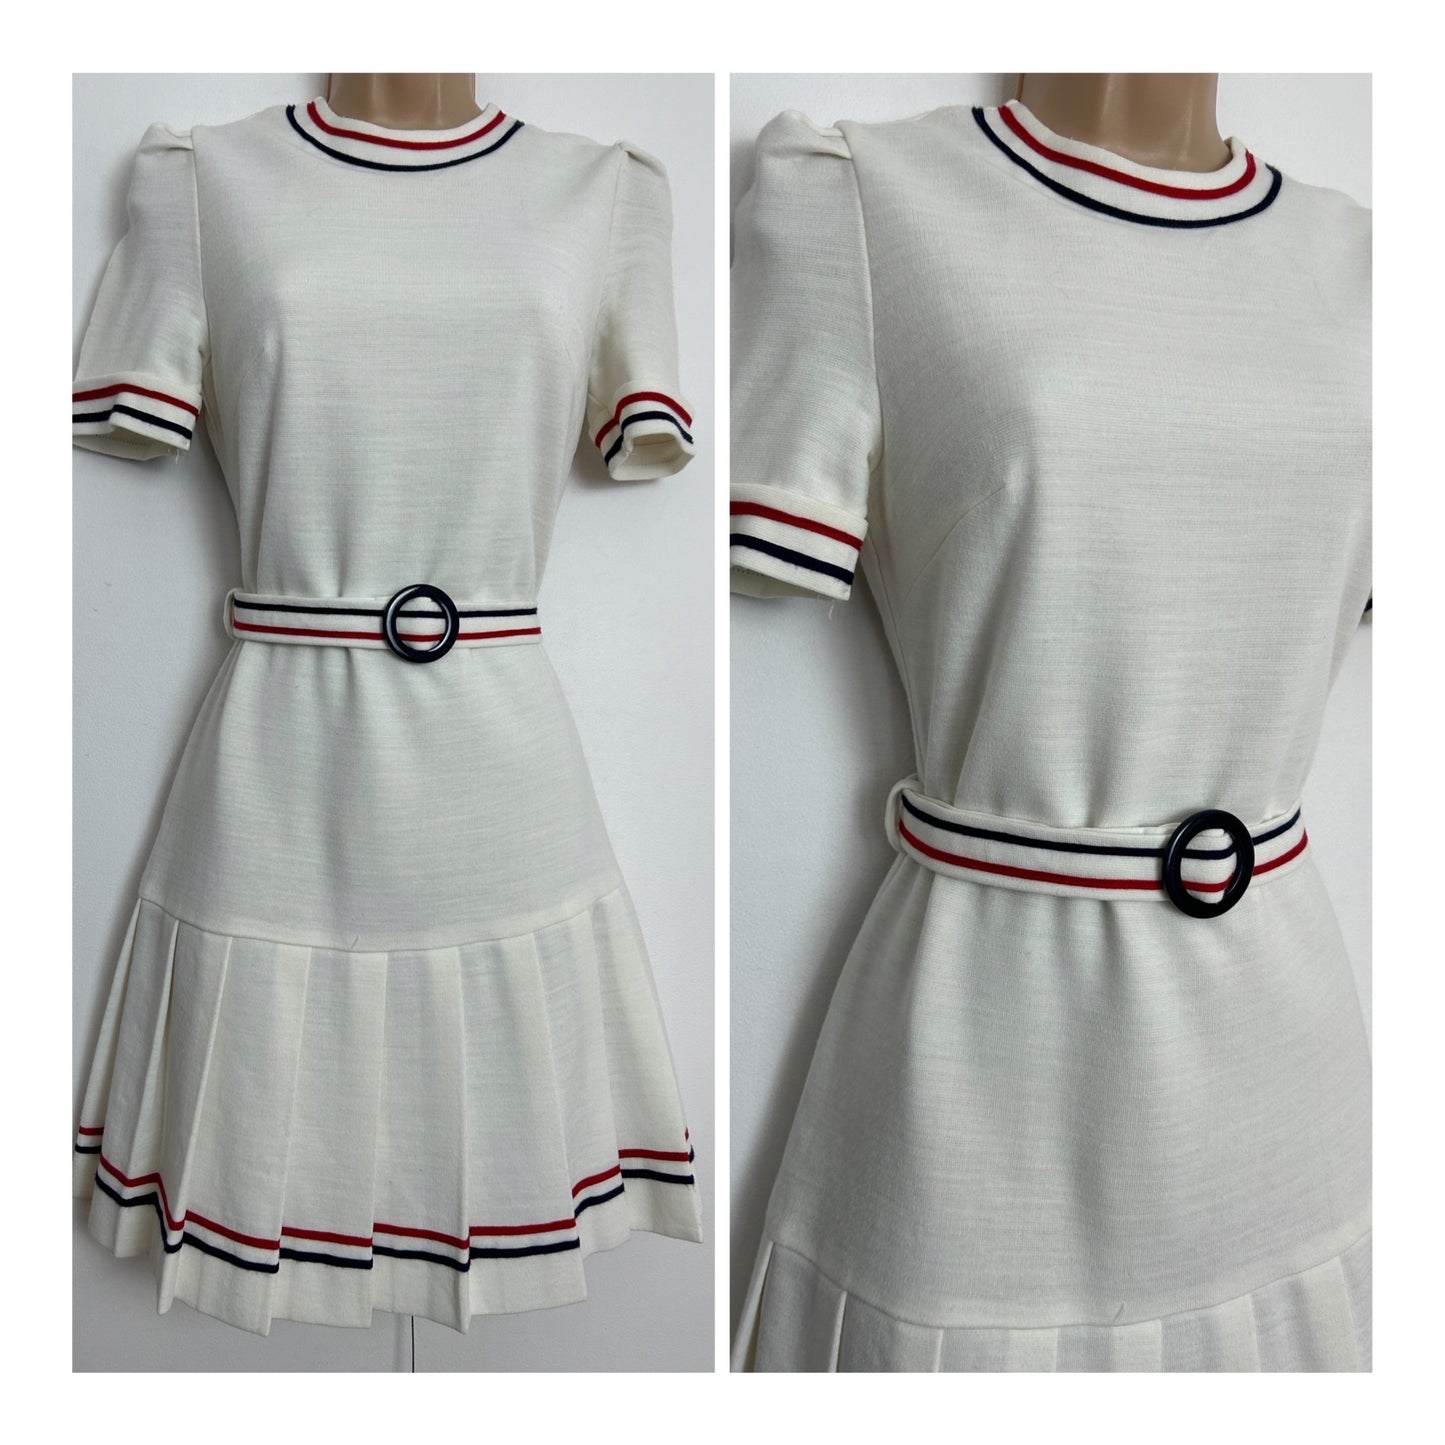 Vintage 1960s UK Size 8 White With Red & Blue Braid Trim Short Sleeve Belted Pleated Mod Mini Dress